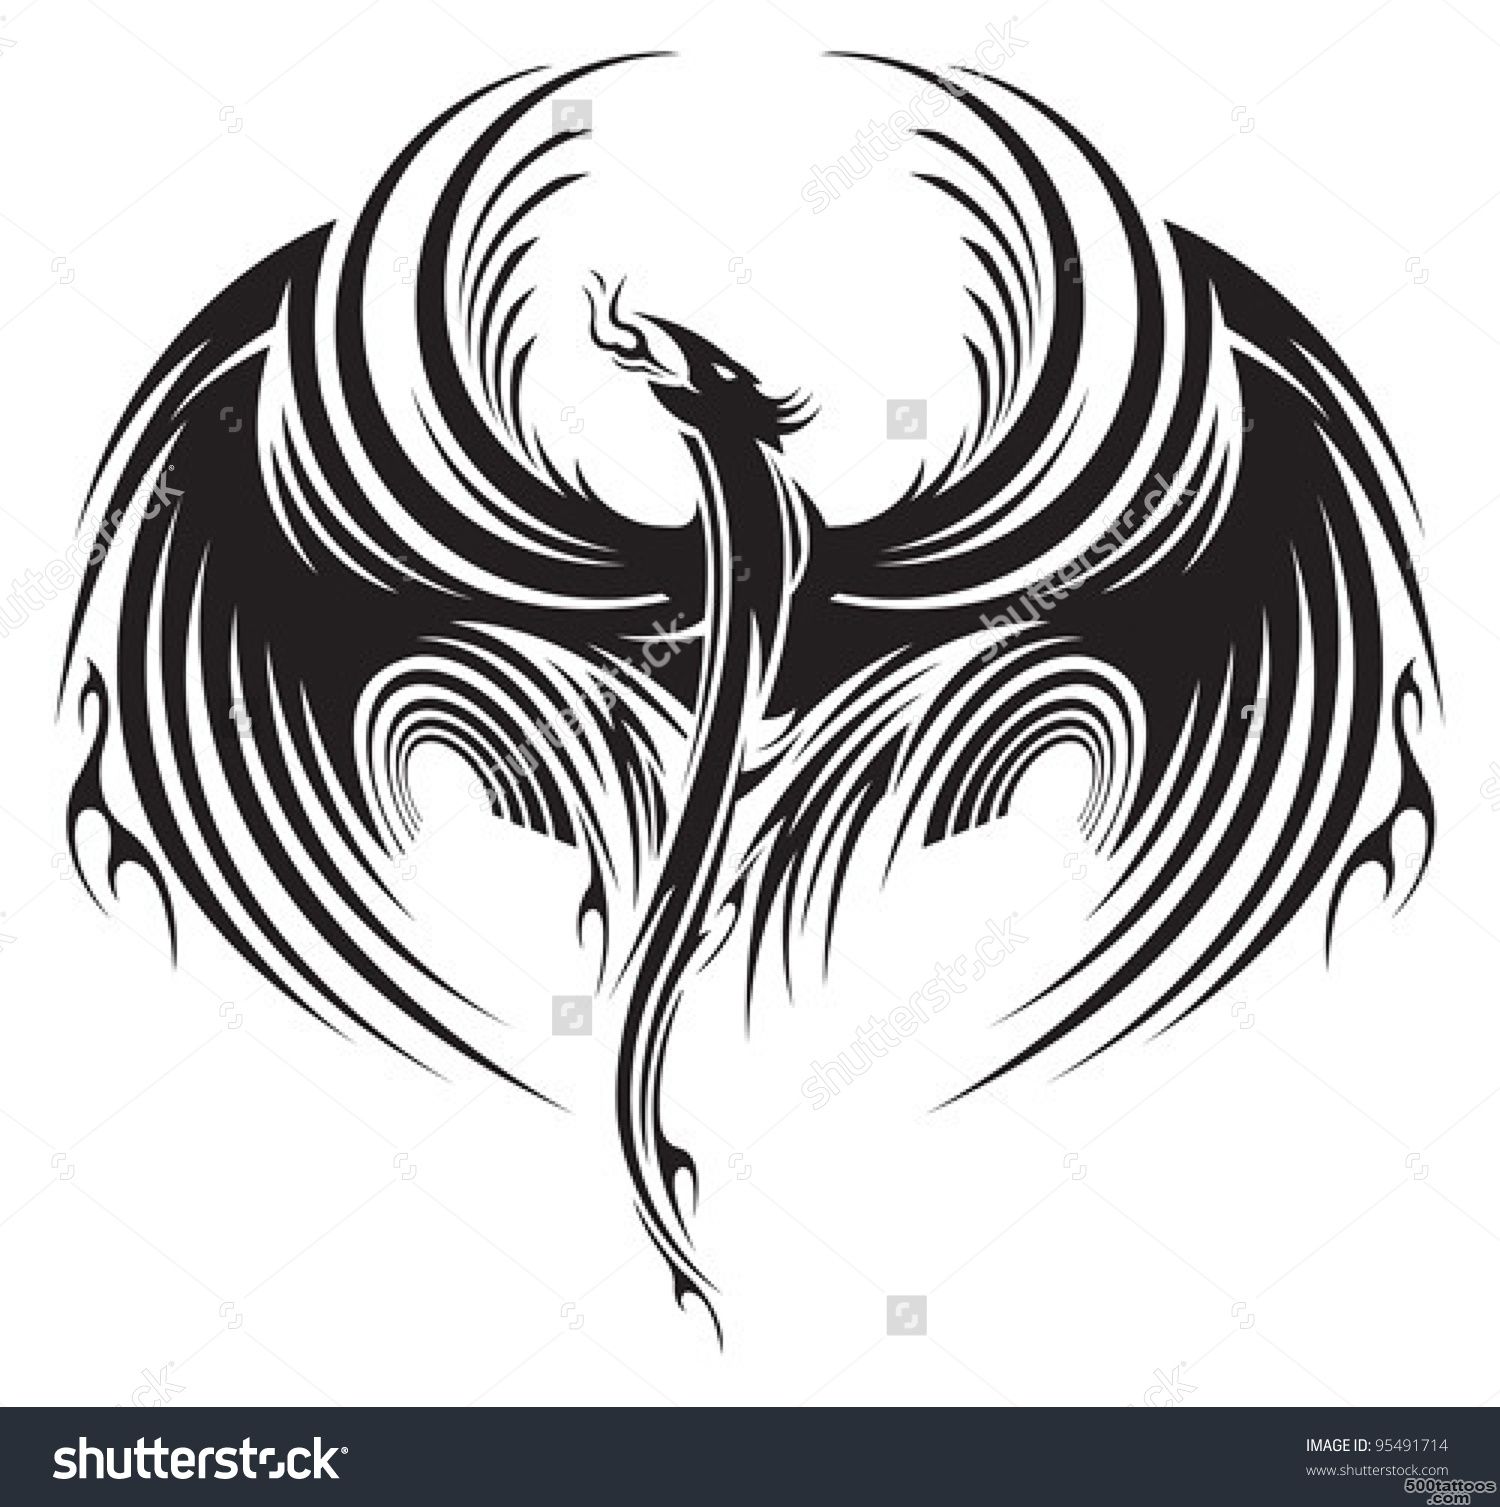 Phoenix Tattoo Stock Photos, Images, amp Pictures  Shutterstock_35